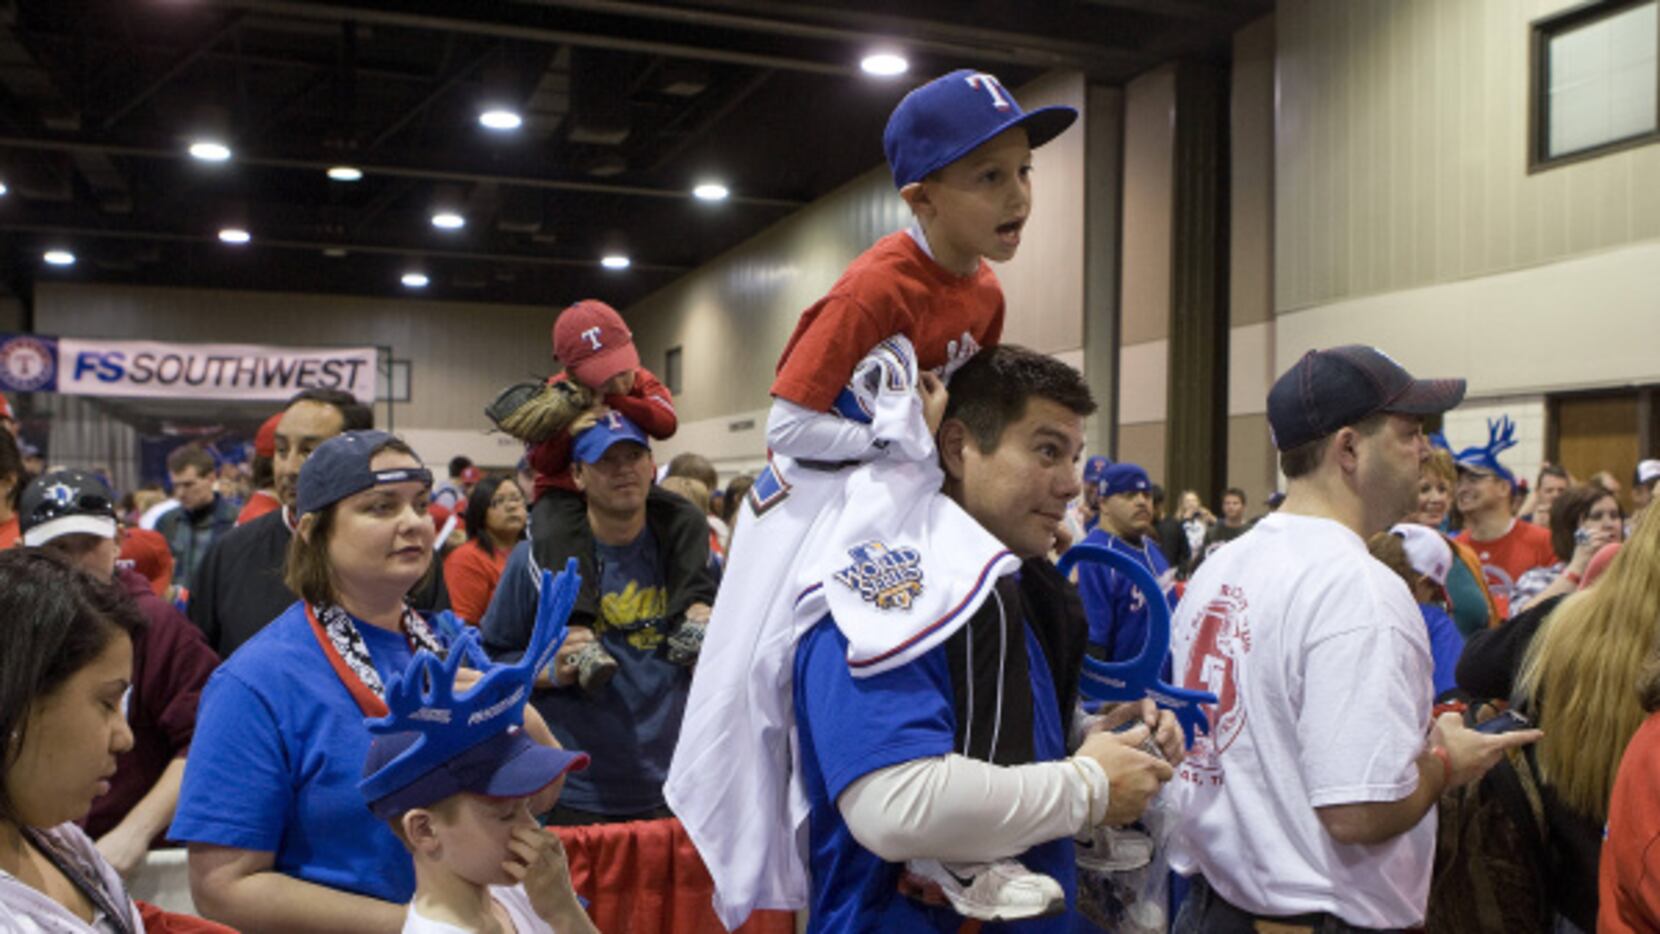 Rangers to bring back Fan Fest for 2023; will present team awards on